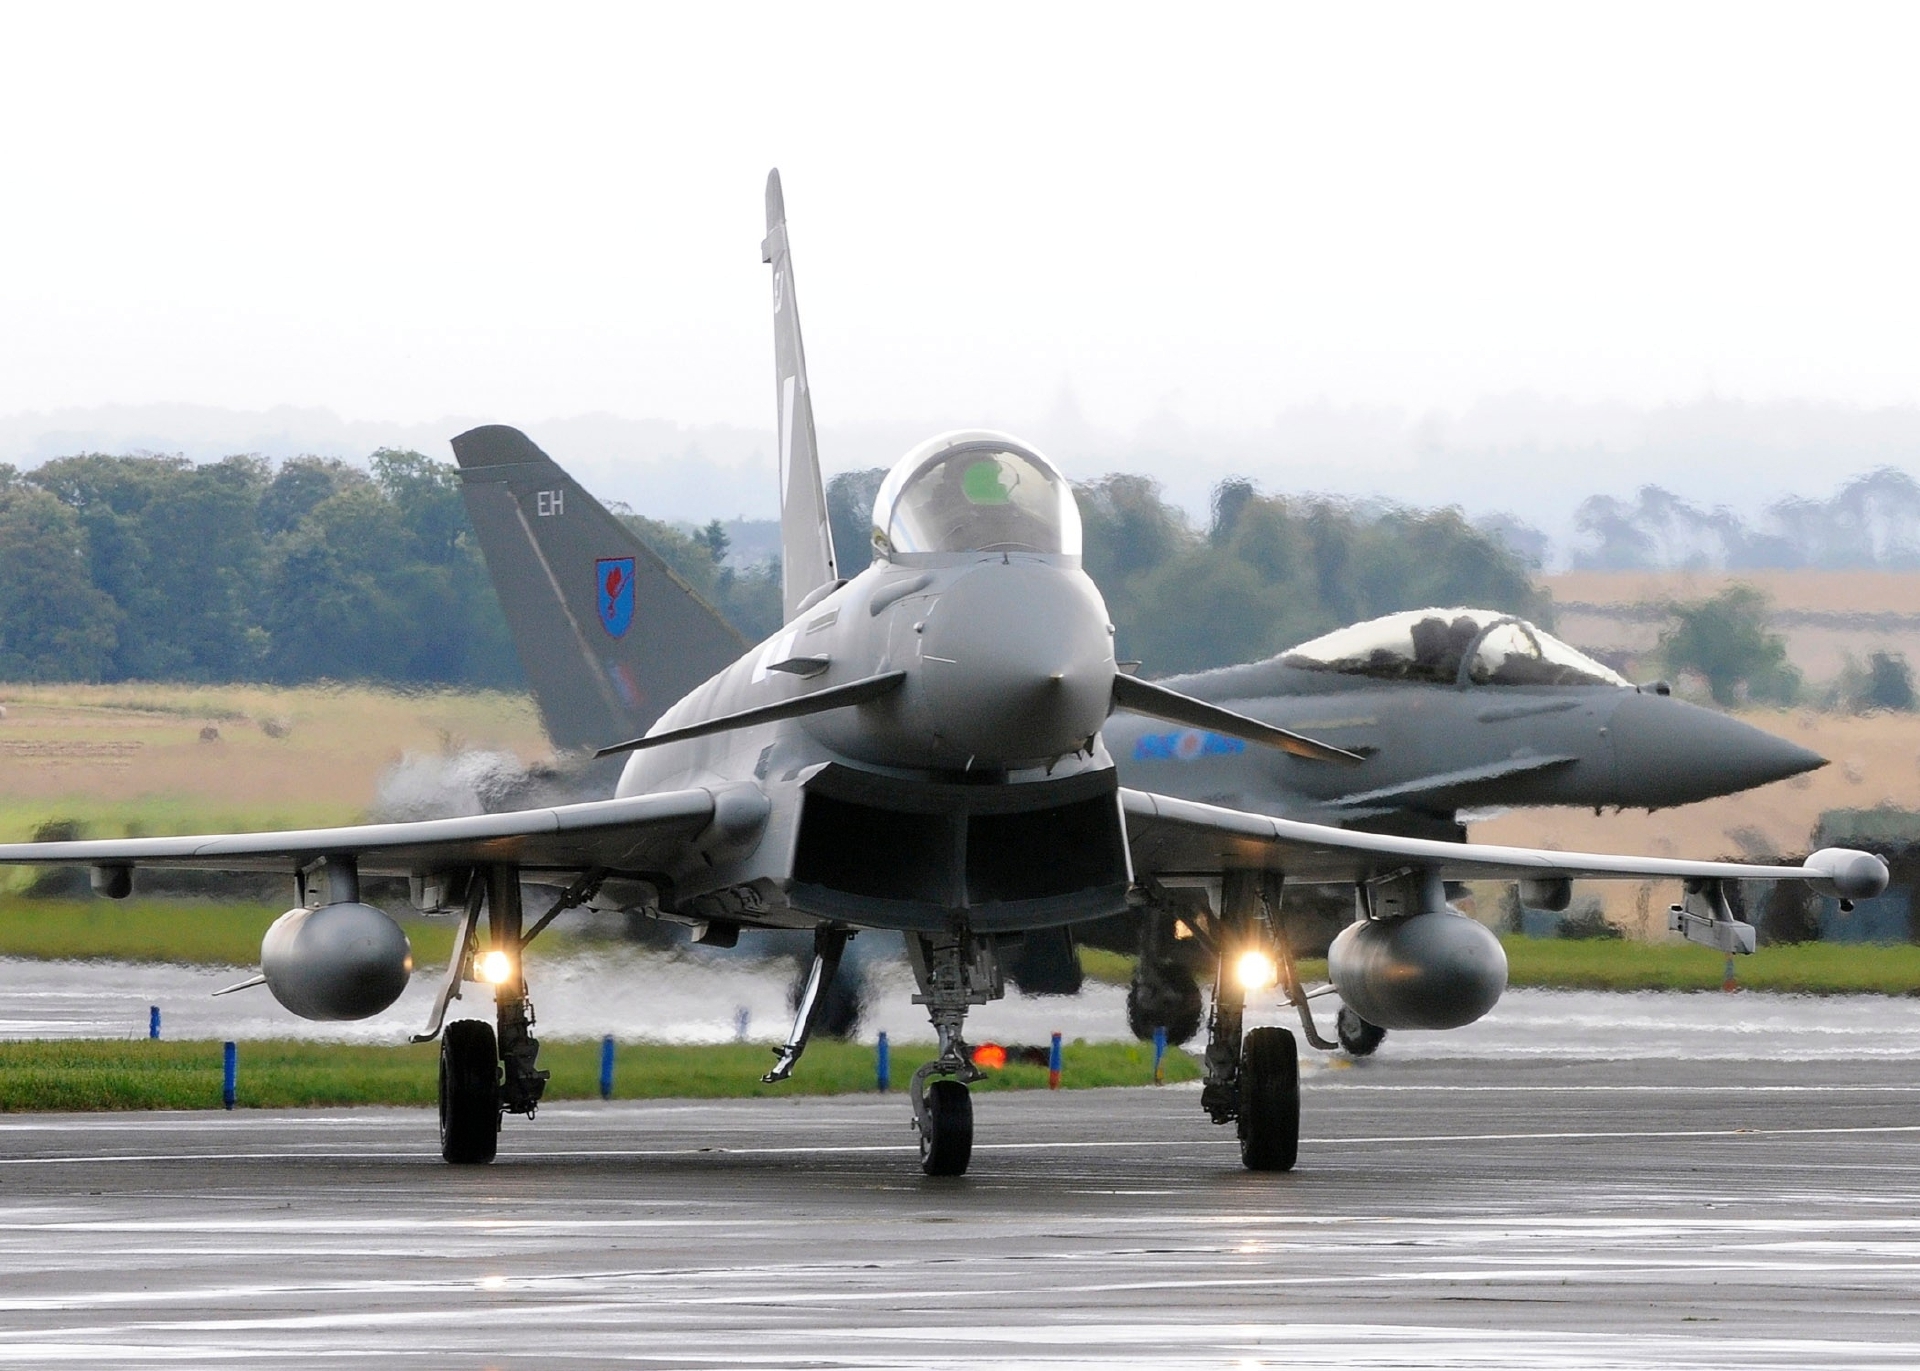 An RAF Typhoon at its former home in Leuchars